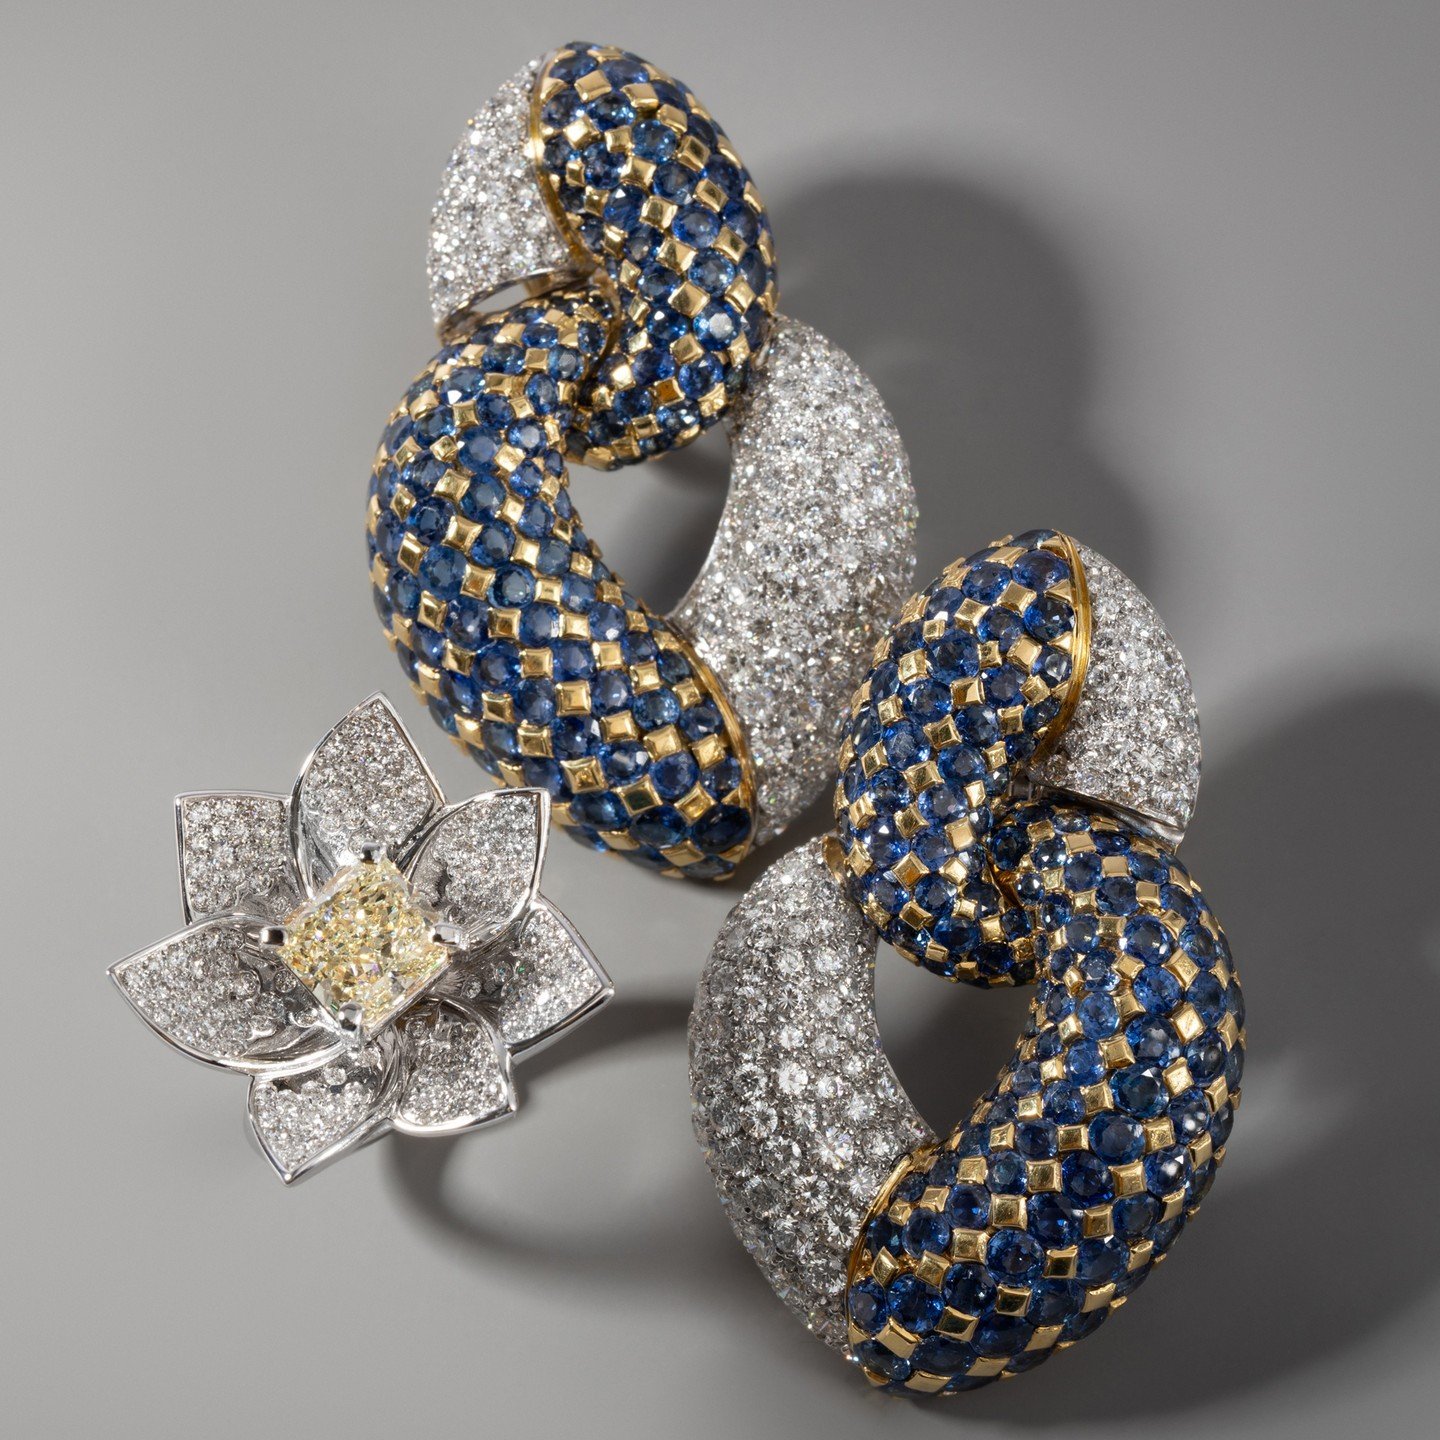 Are you a jewelry connoisseur or simply have an appreciation for fine jewelry? Take your knowledge to new heights with our exclusive newsletter.

Subscribe to our newsletter today and be the first to get access to:

- Acquisition Pieces: Get a front-